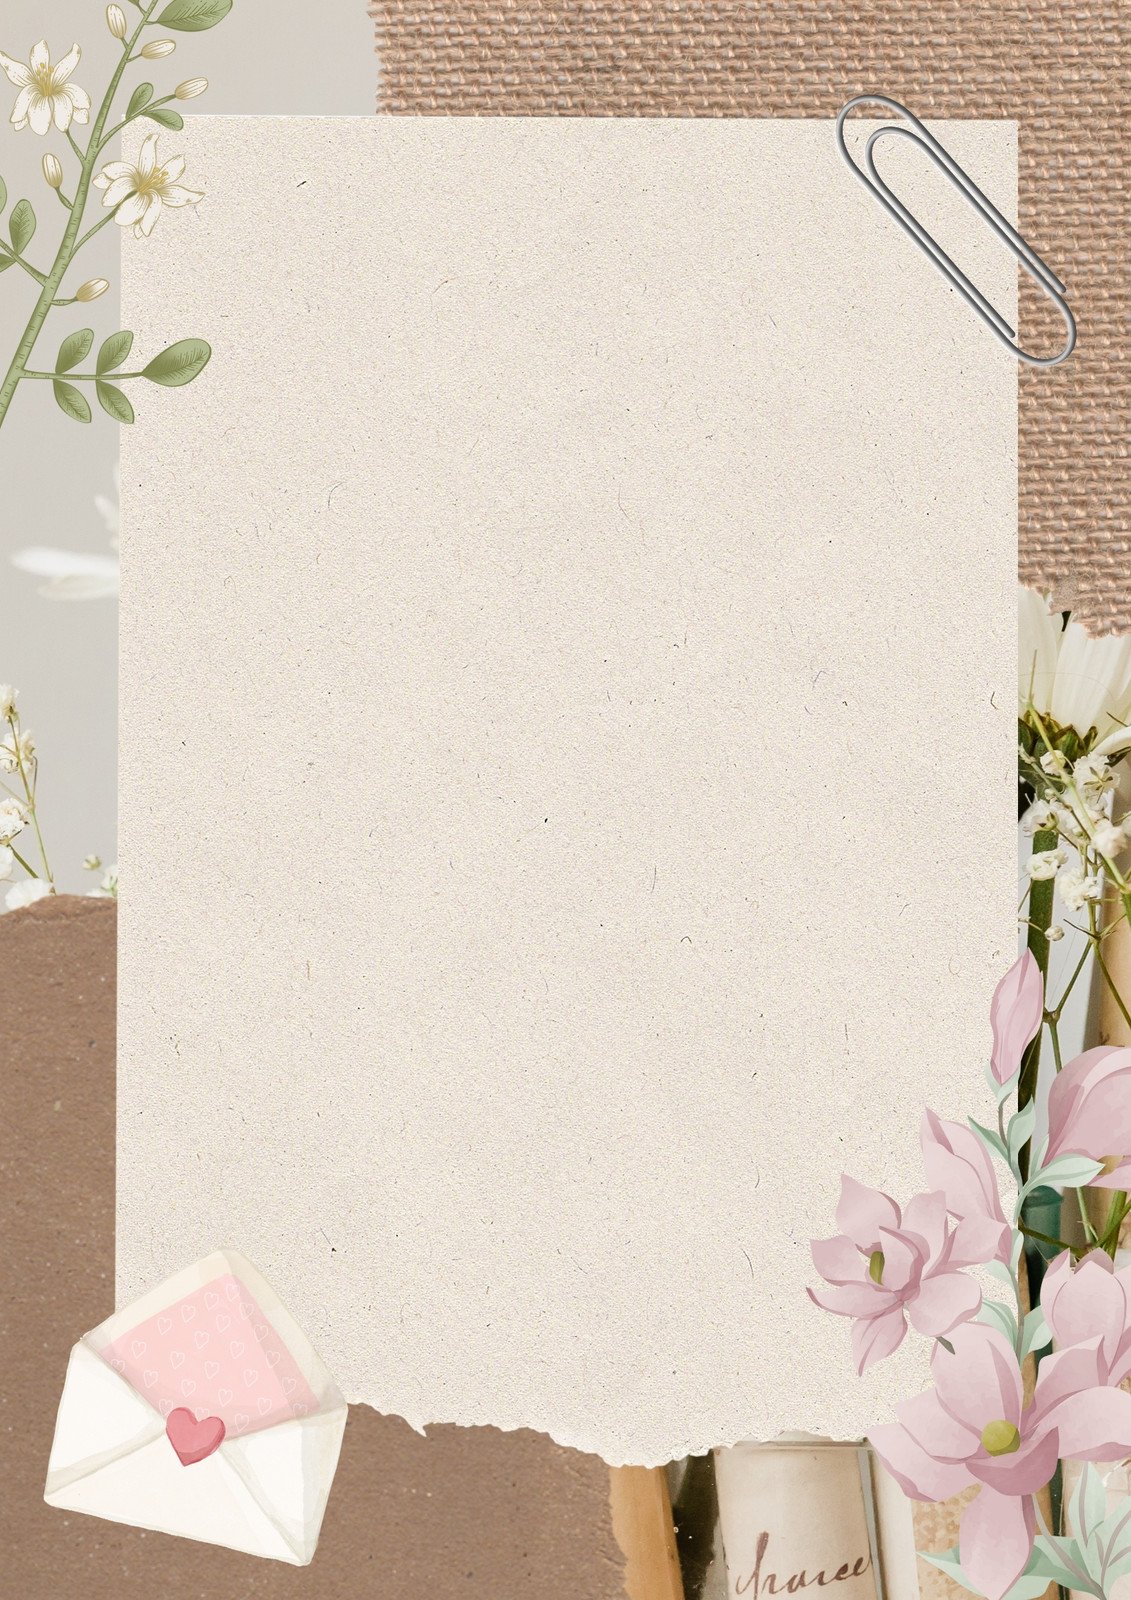 Brown Vintage Love and Flower Blank Paper A4 Document